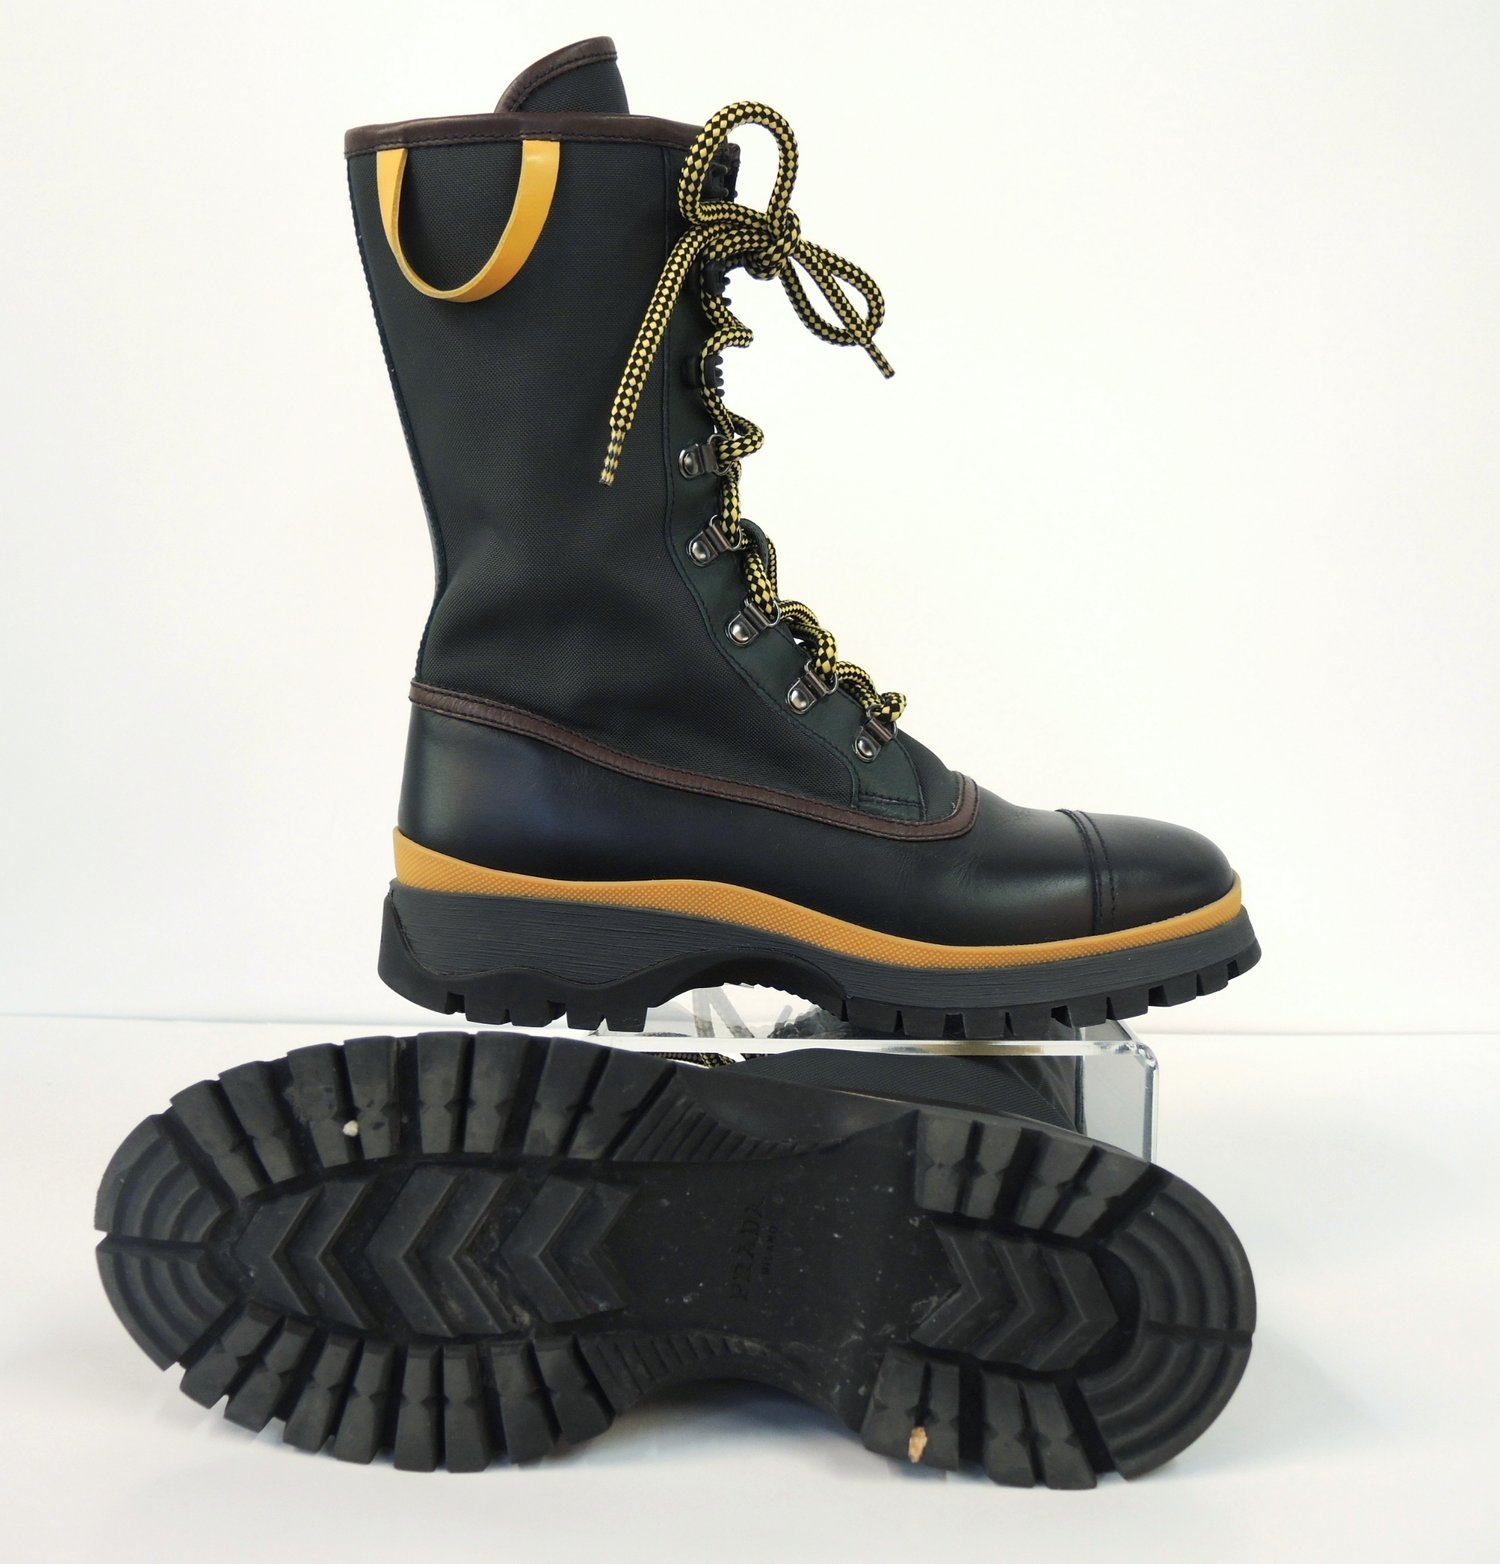 Prada boots  Boots, Hiking boots, Winter boot